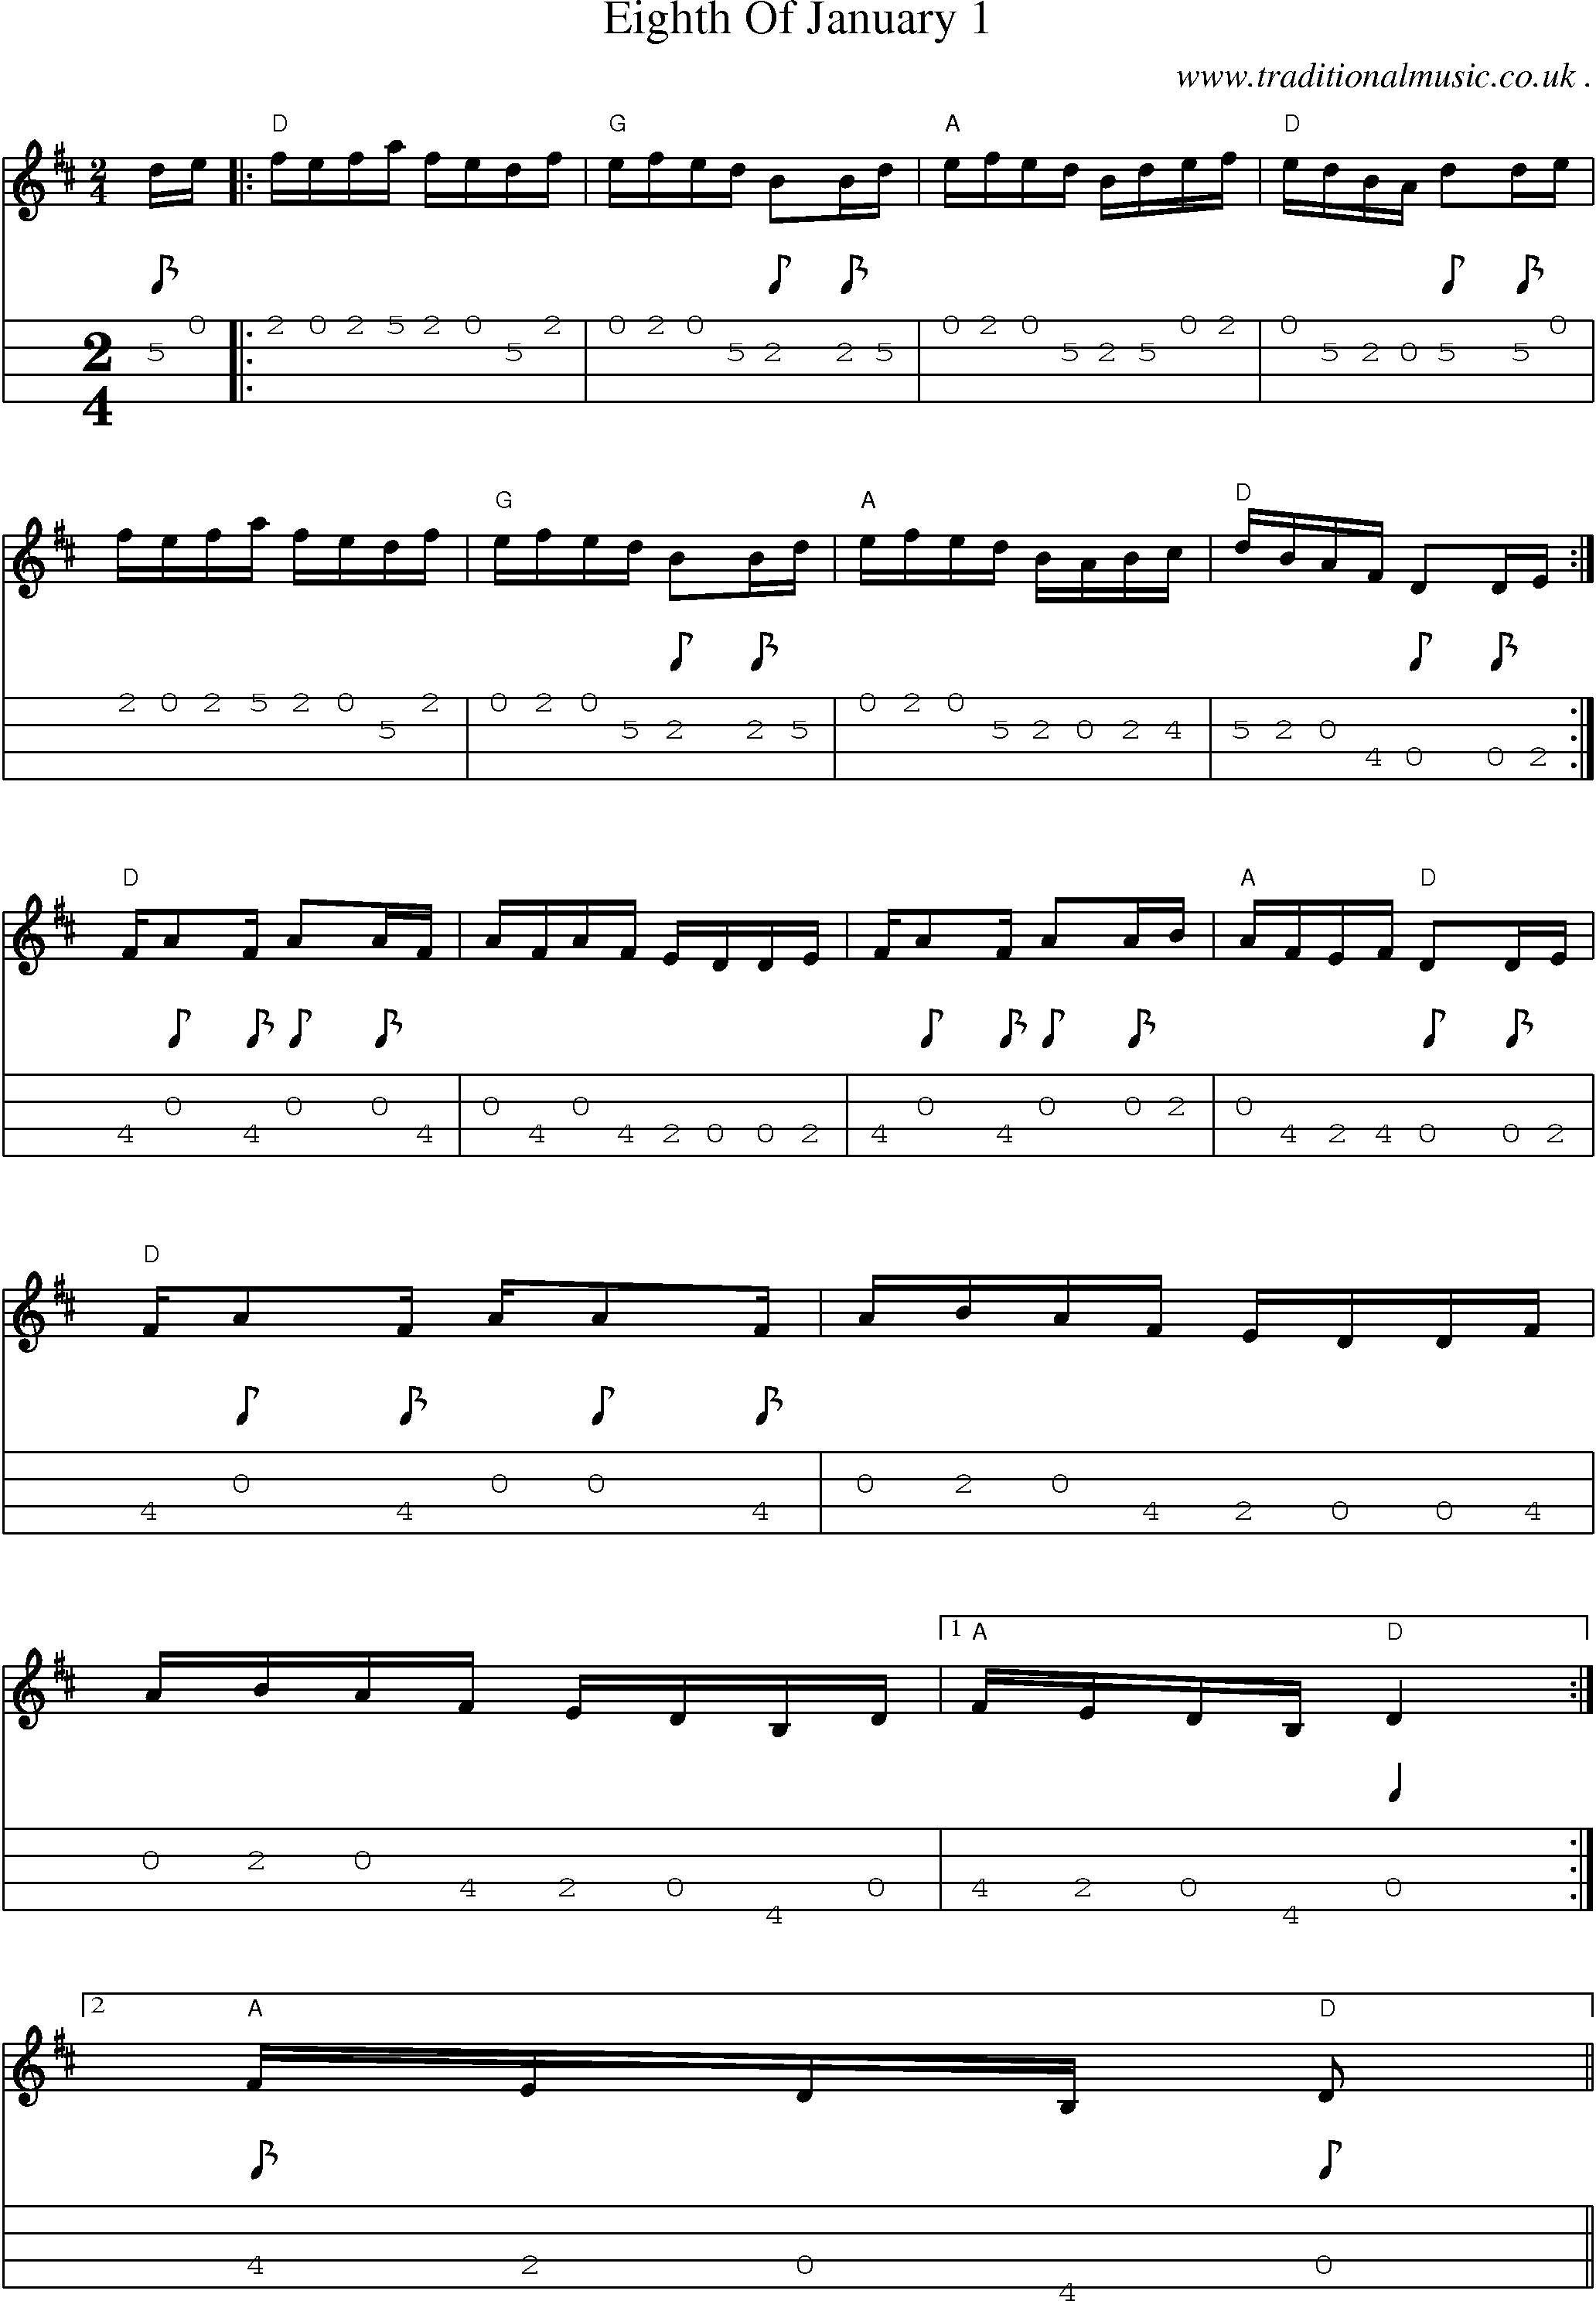 Music Score and Mandolin Tabs for Eighth Of January 1